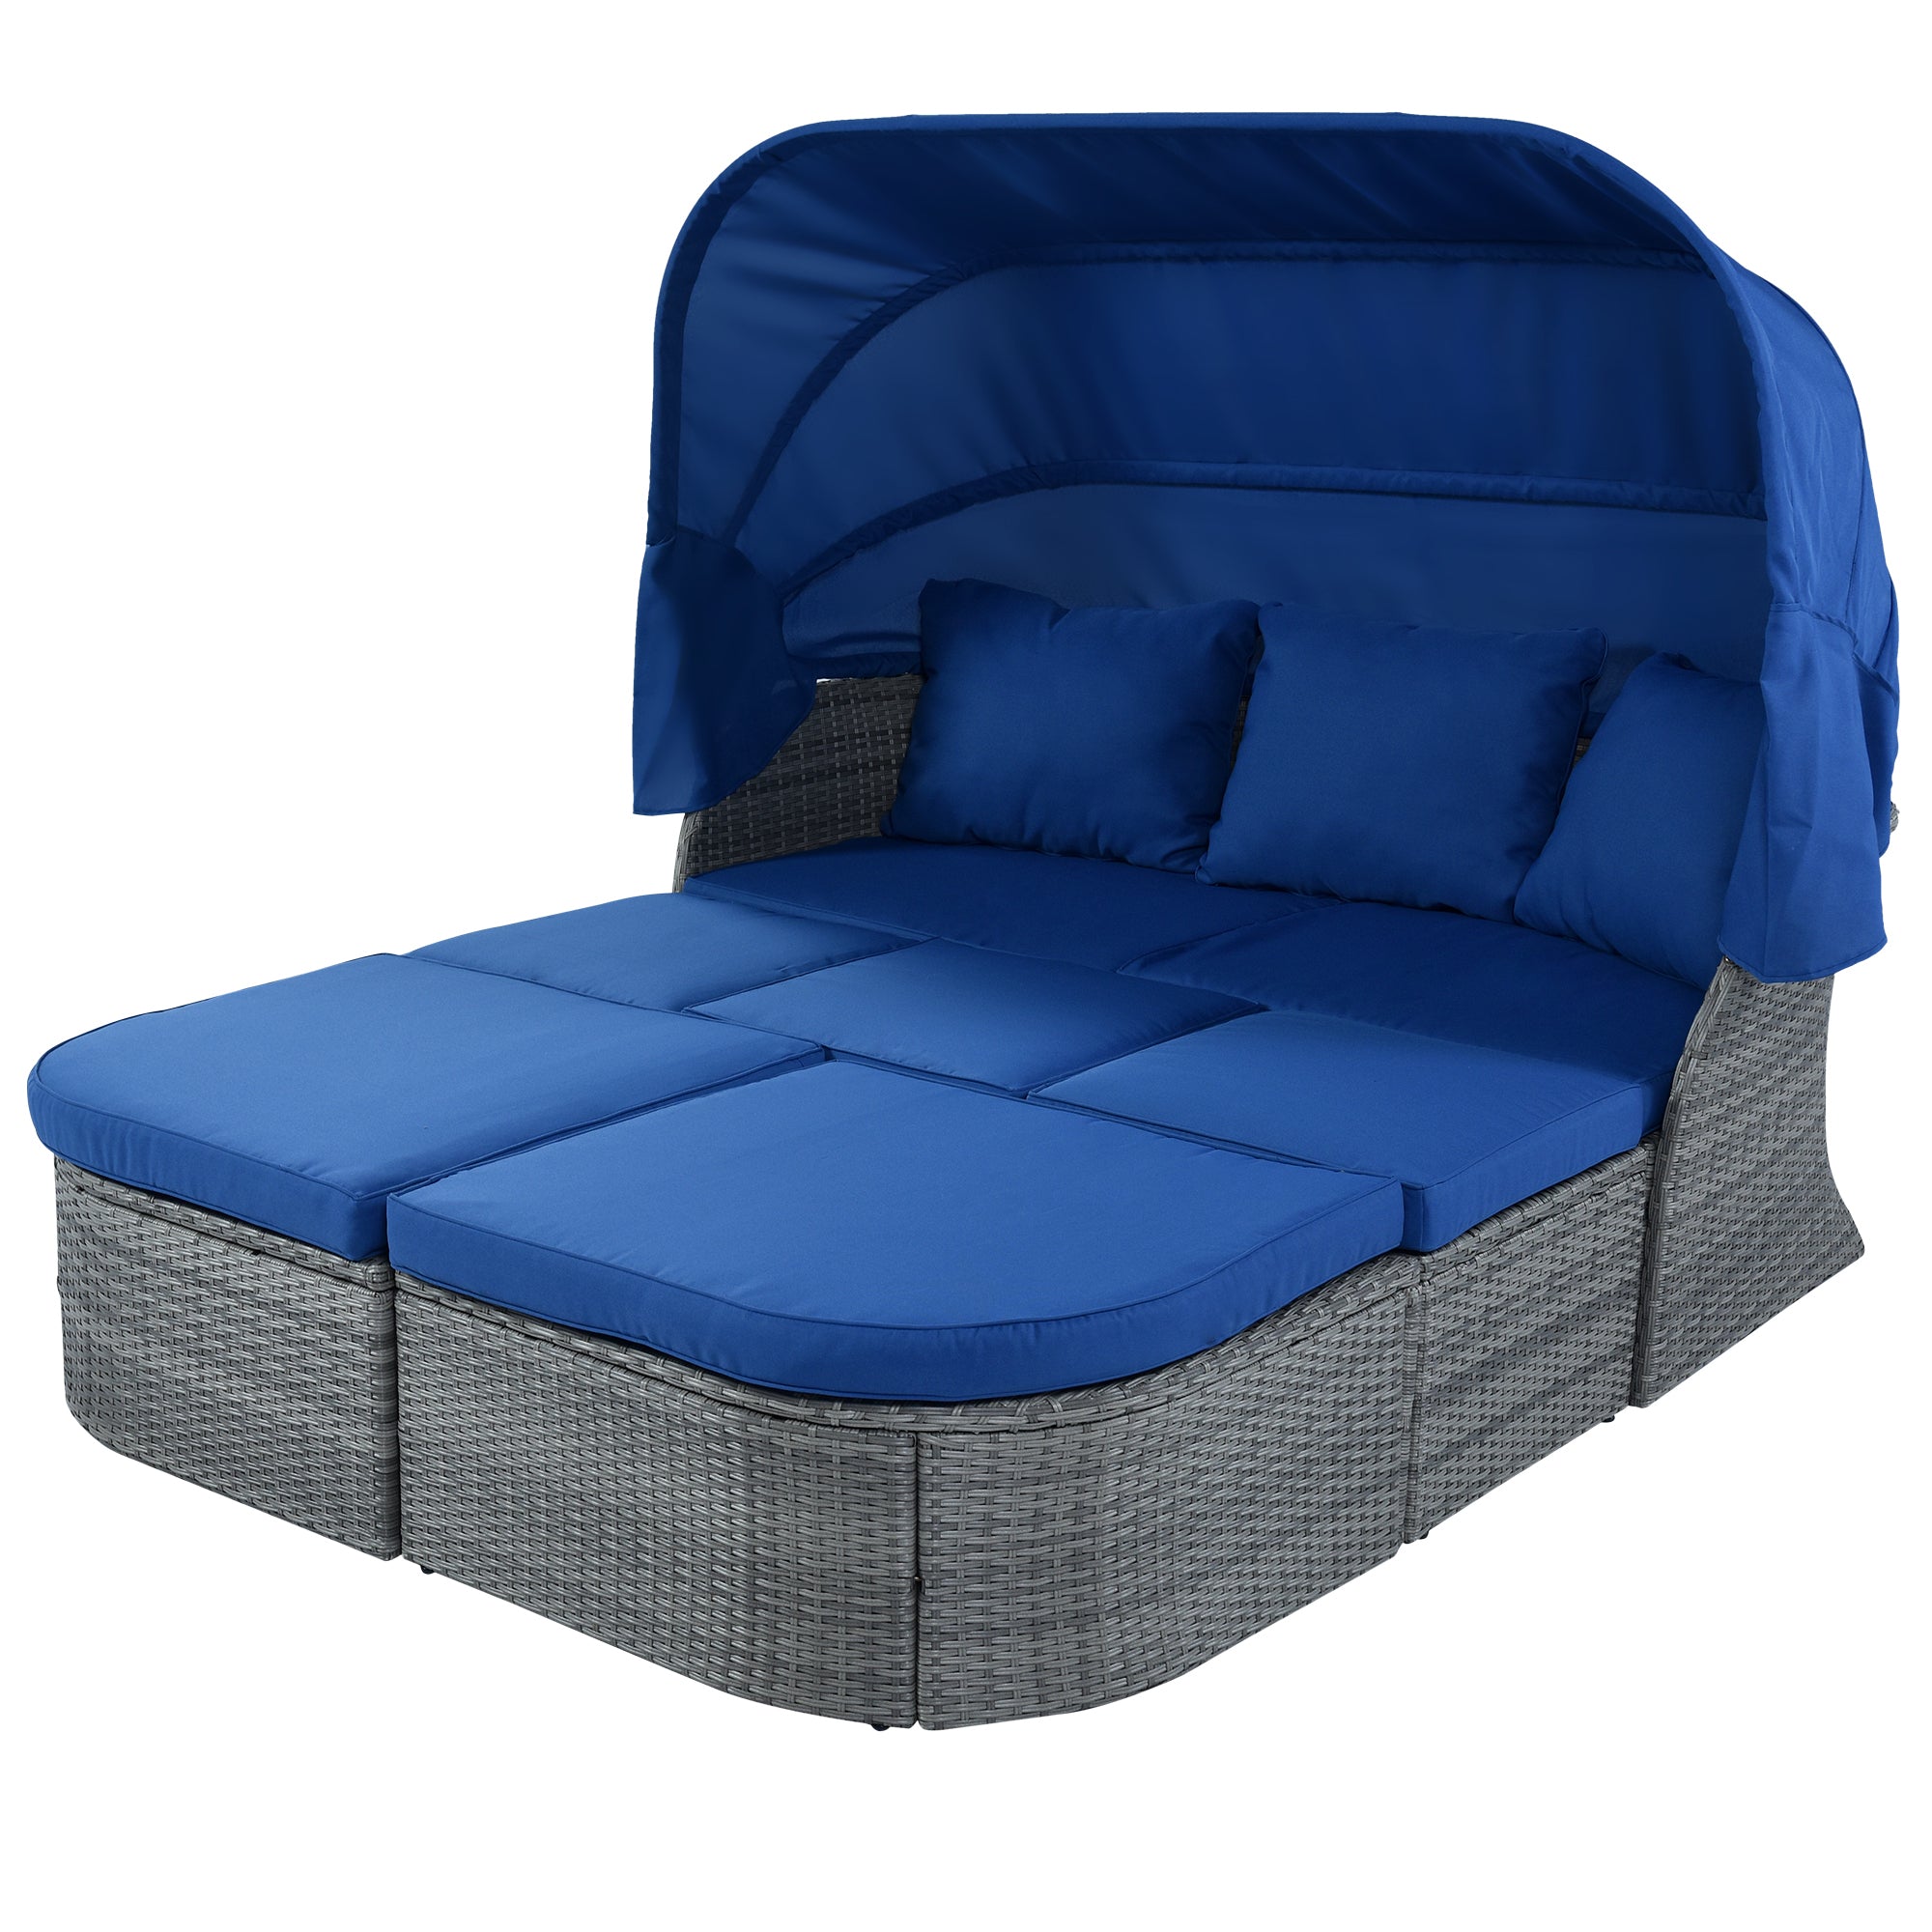 U STYLE Outdoor Patio Furniture Set Daybed Sunbed with blue-rattan